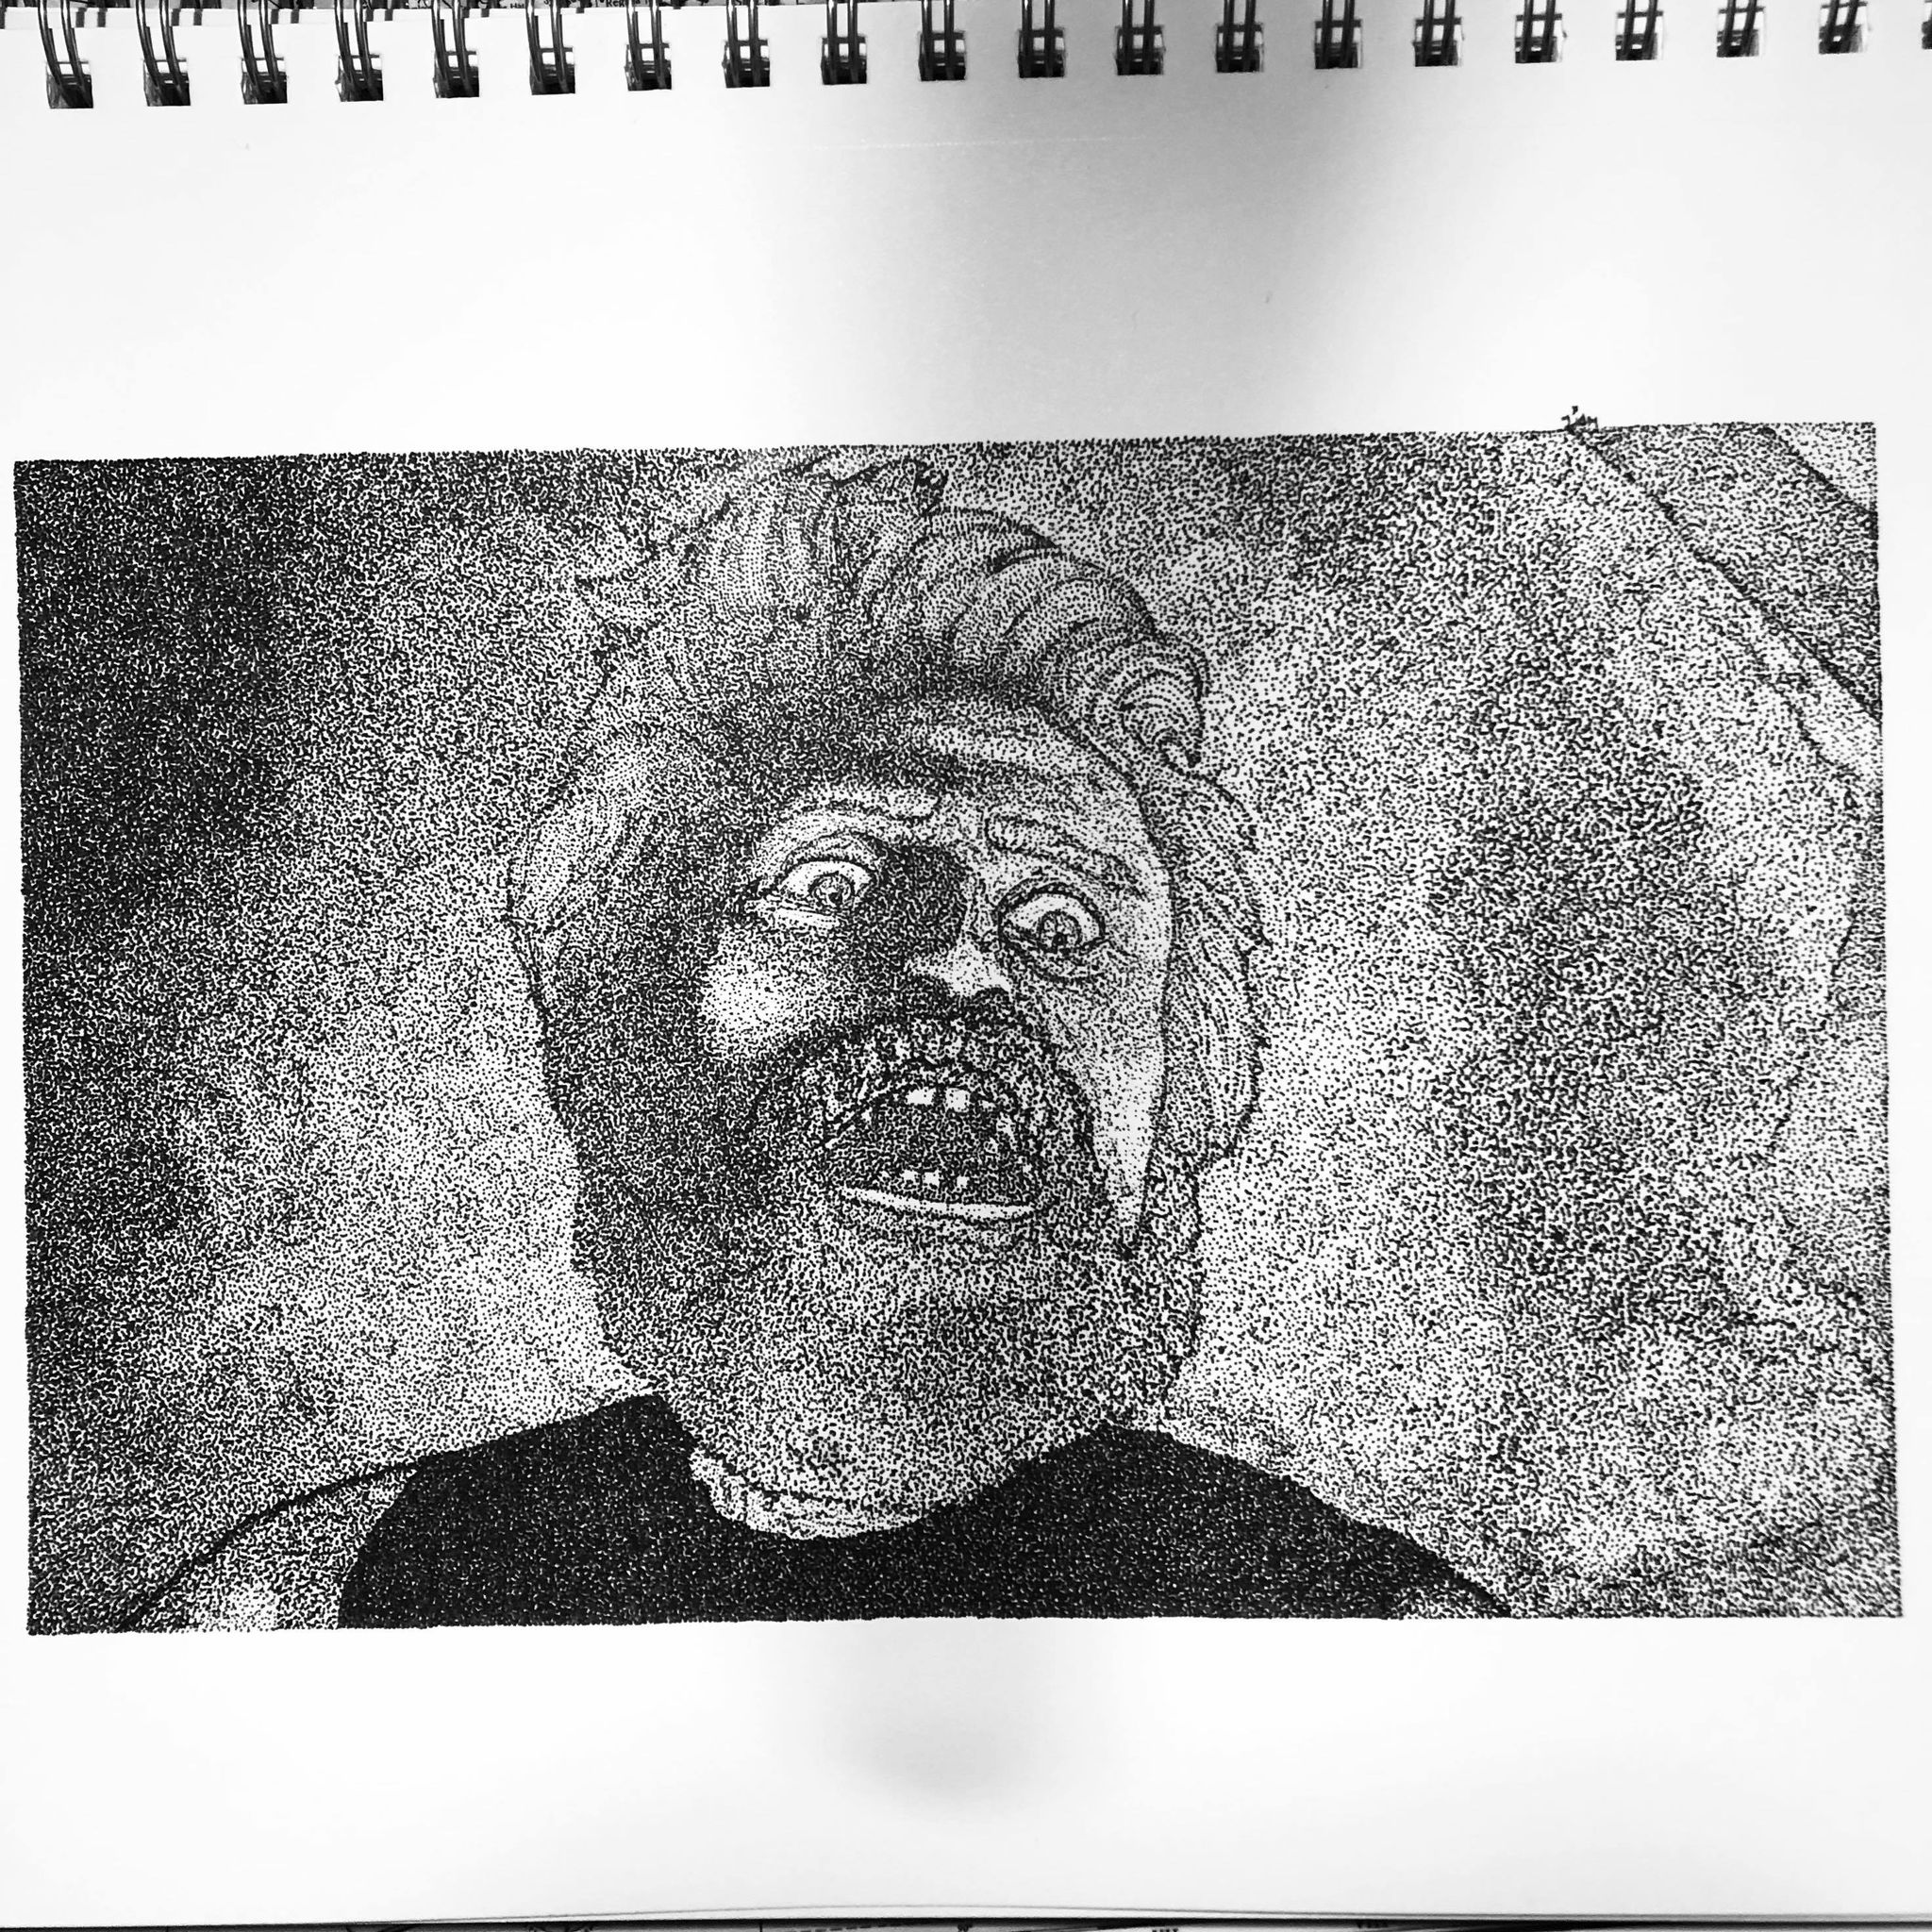 A pointillism sketch of Willem Dafoe's character in the 2019 film "The Lighthouse." The sketch is black-and-white and is a close-up on Dafoe's character's face in a state of shock, panic, and disbelief. The sketch was completed in COVID self-isolation after being inspired by the film, which centres around being socially isolated and experiencing the effects of cabin-fever.